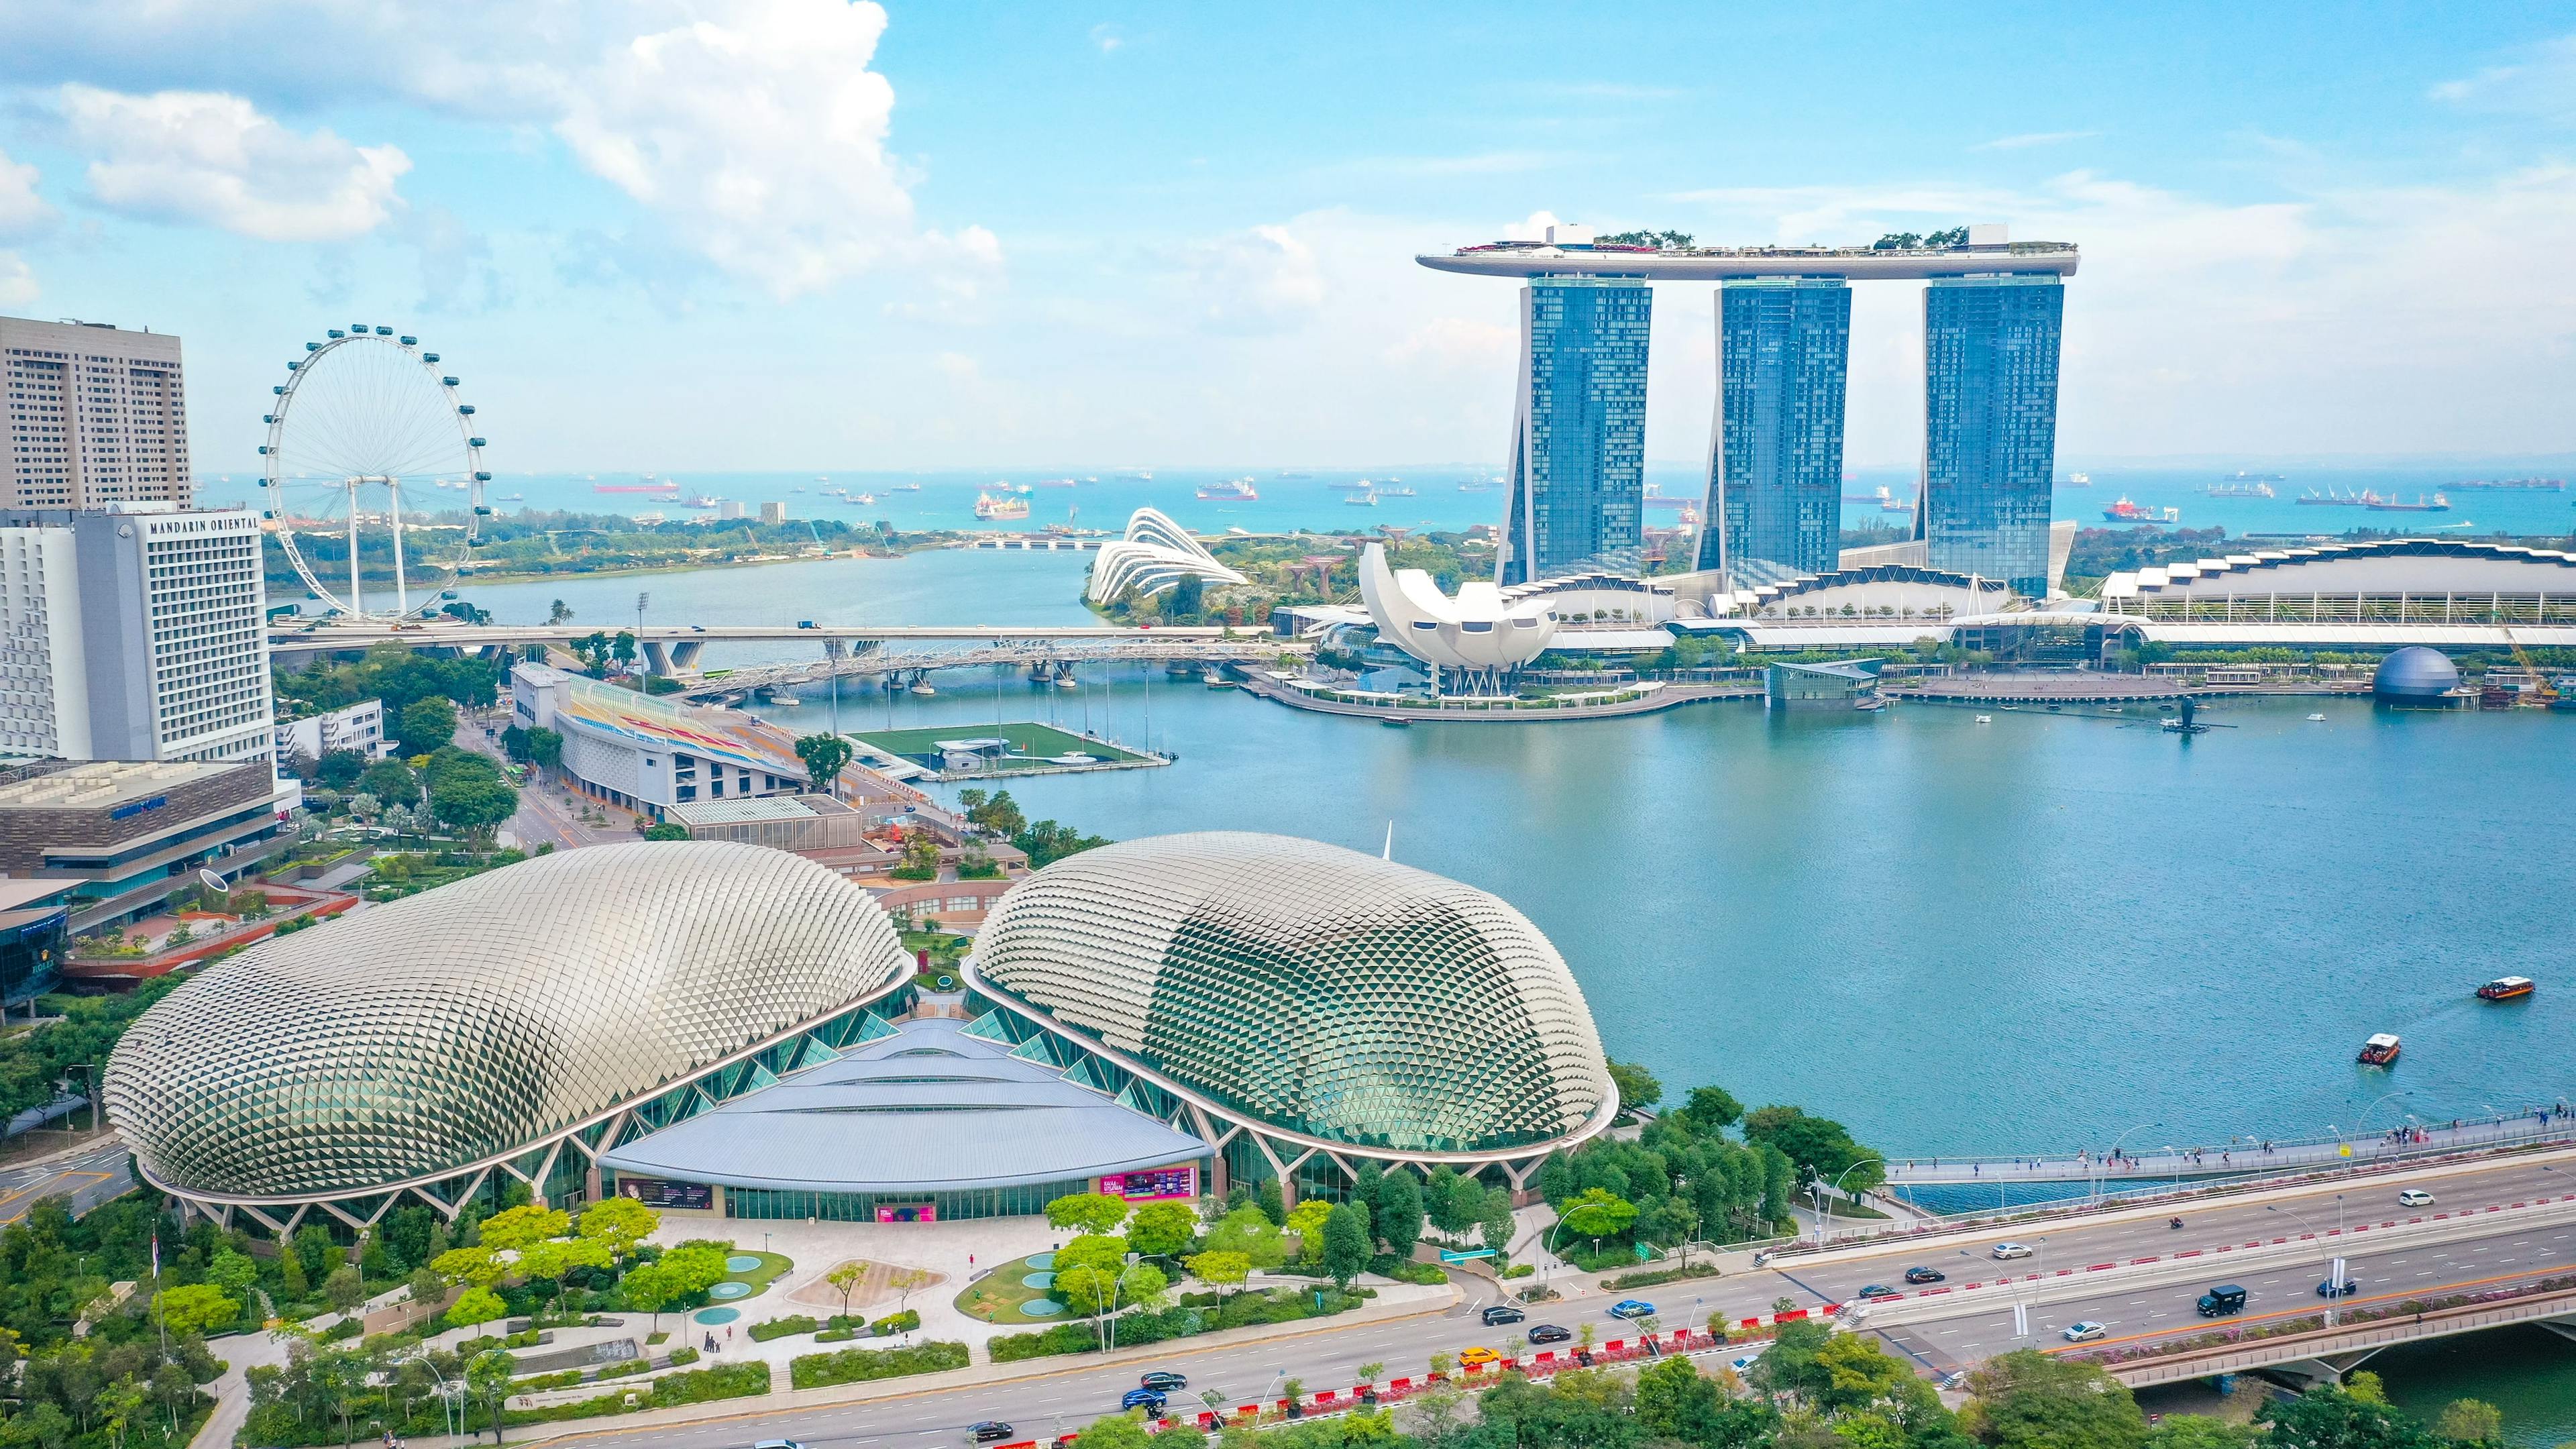 Singapore tour packages: Capturing the Magic of Singapore on Your Honeymoon